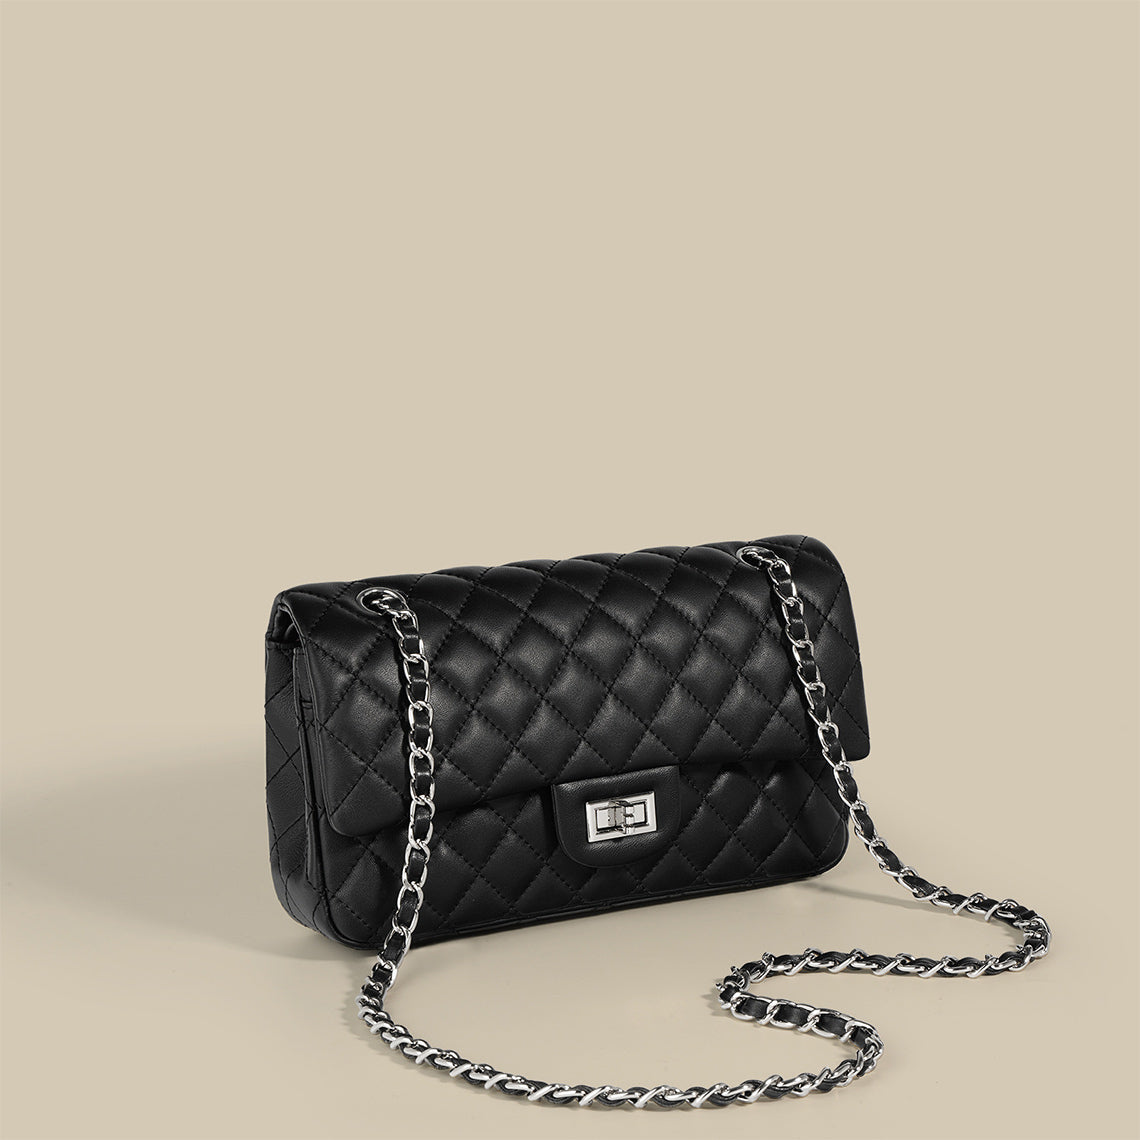 Sheep Leather Inspired Classic 2.55 Chain Bag